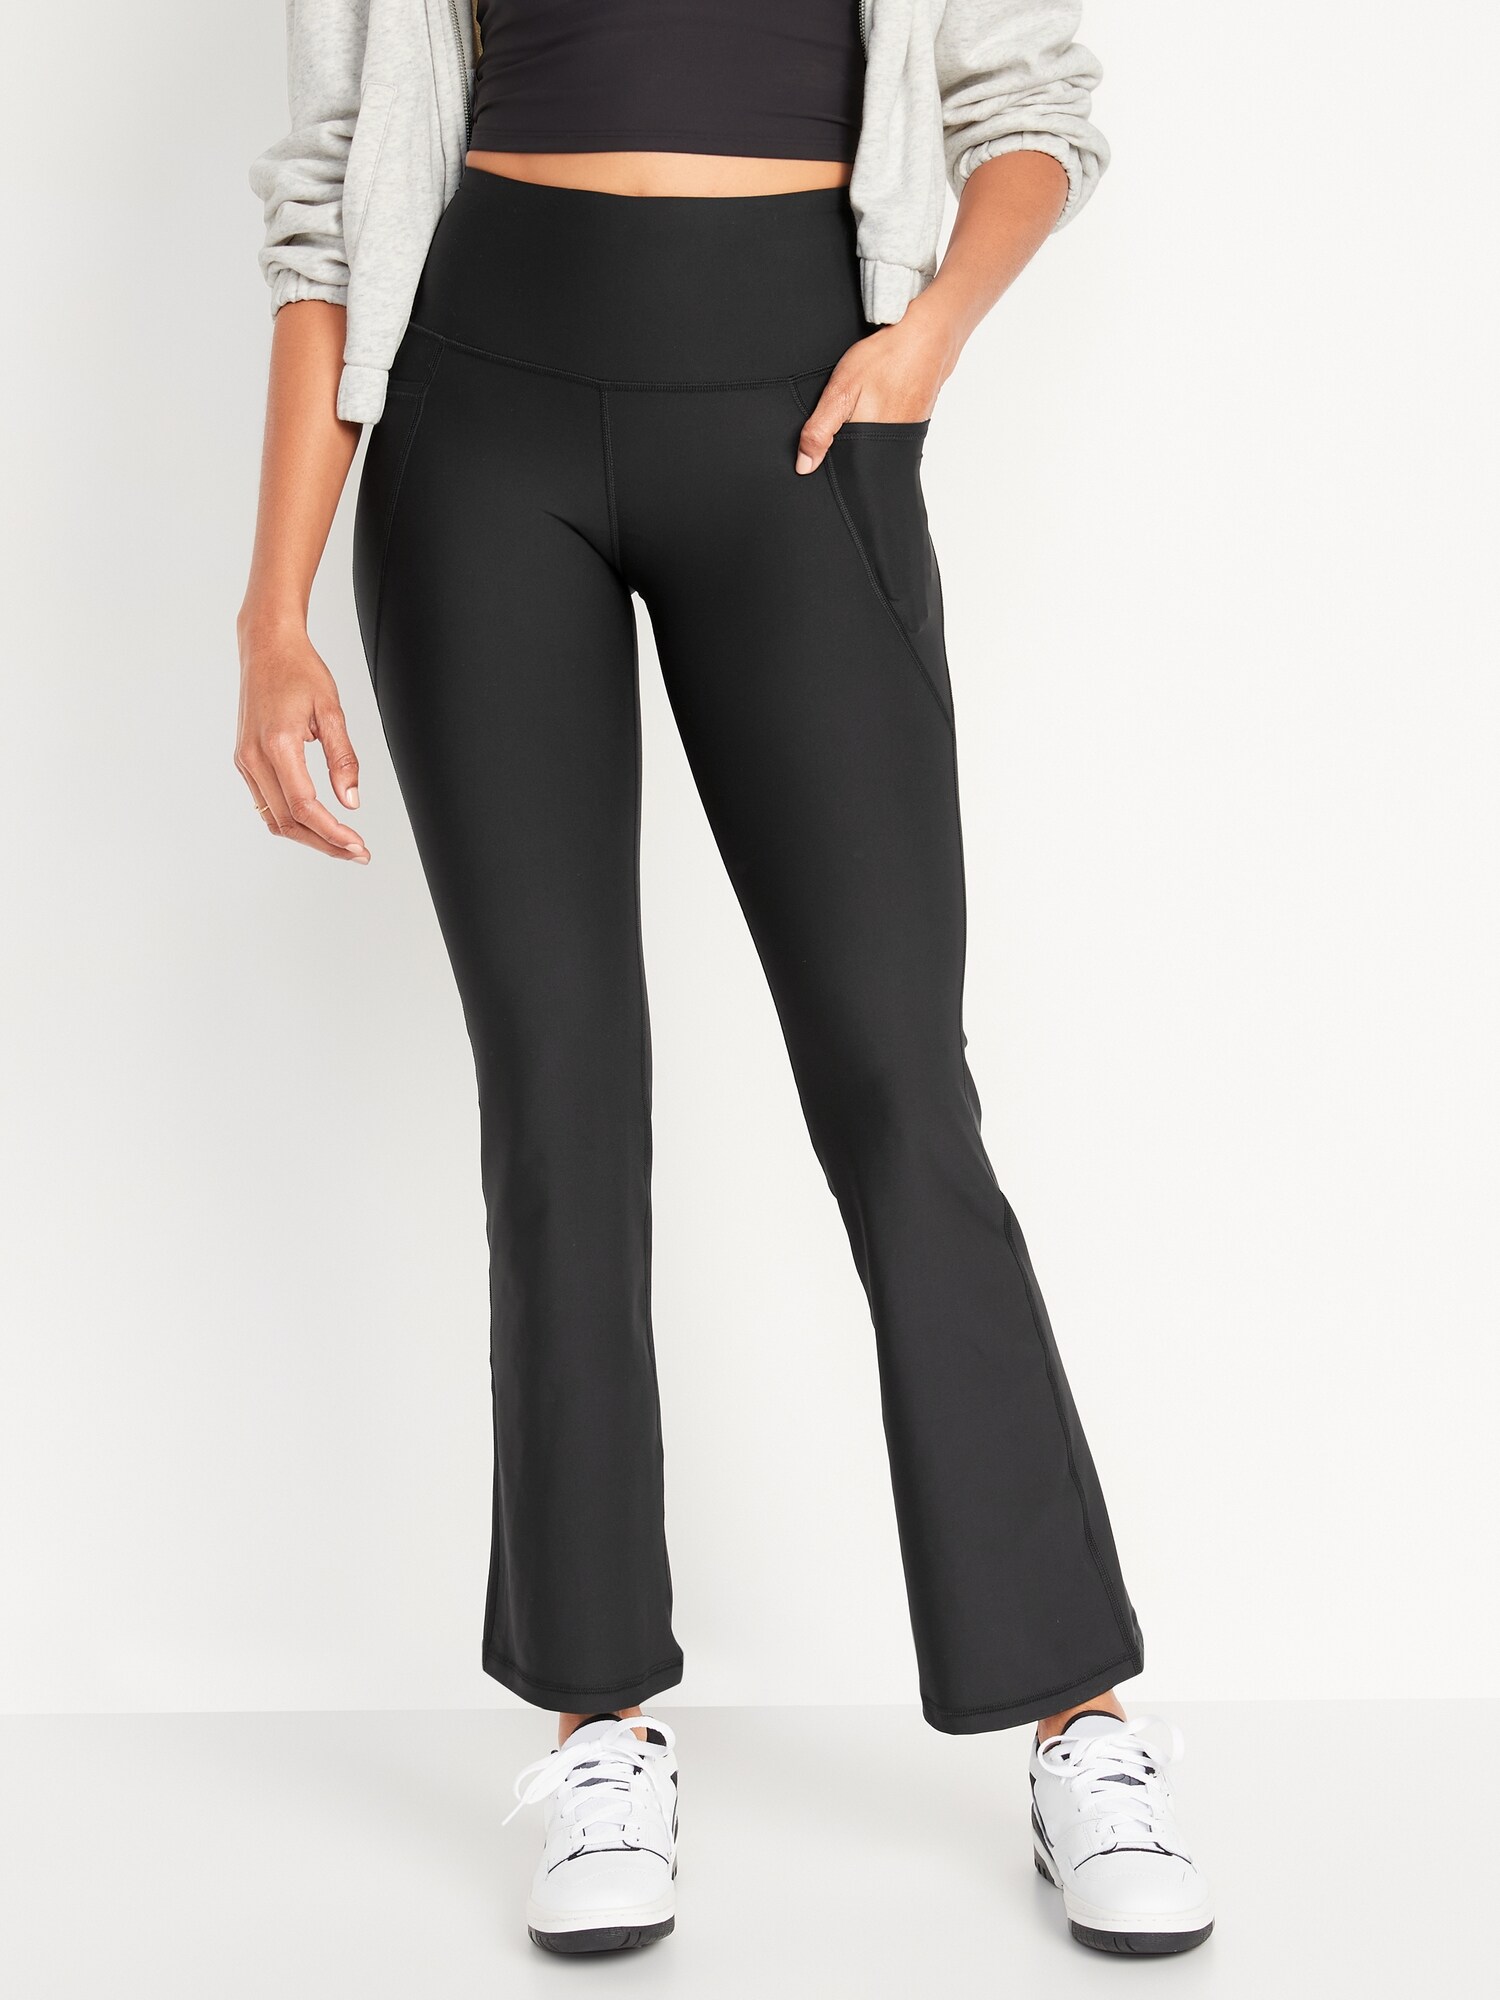 High-Waisted PowerSoft Slim Flare Compression Pants for Women | Old Navy